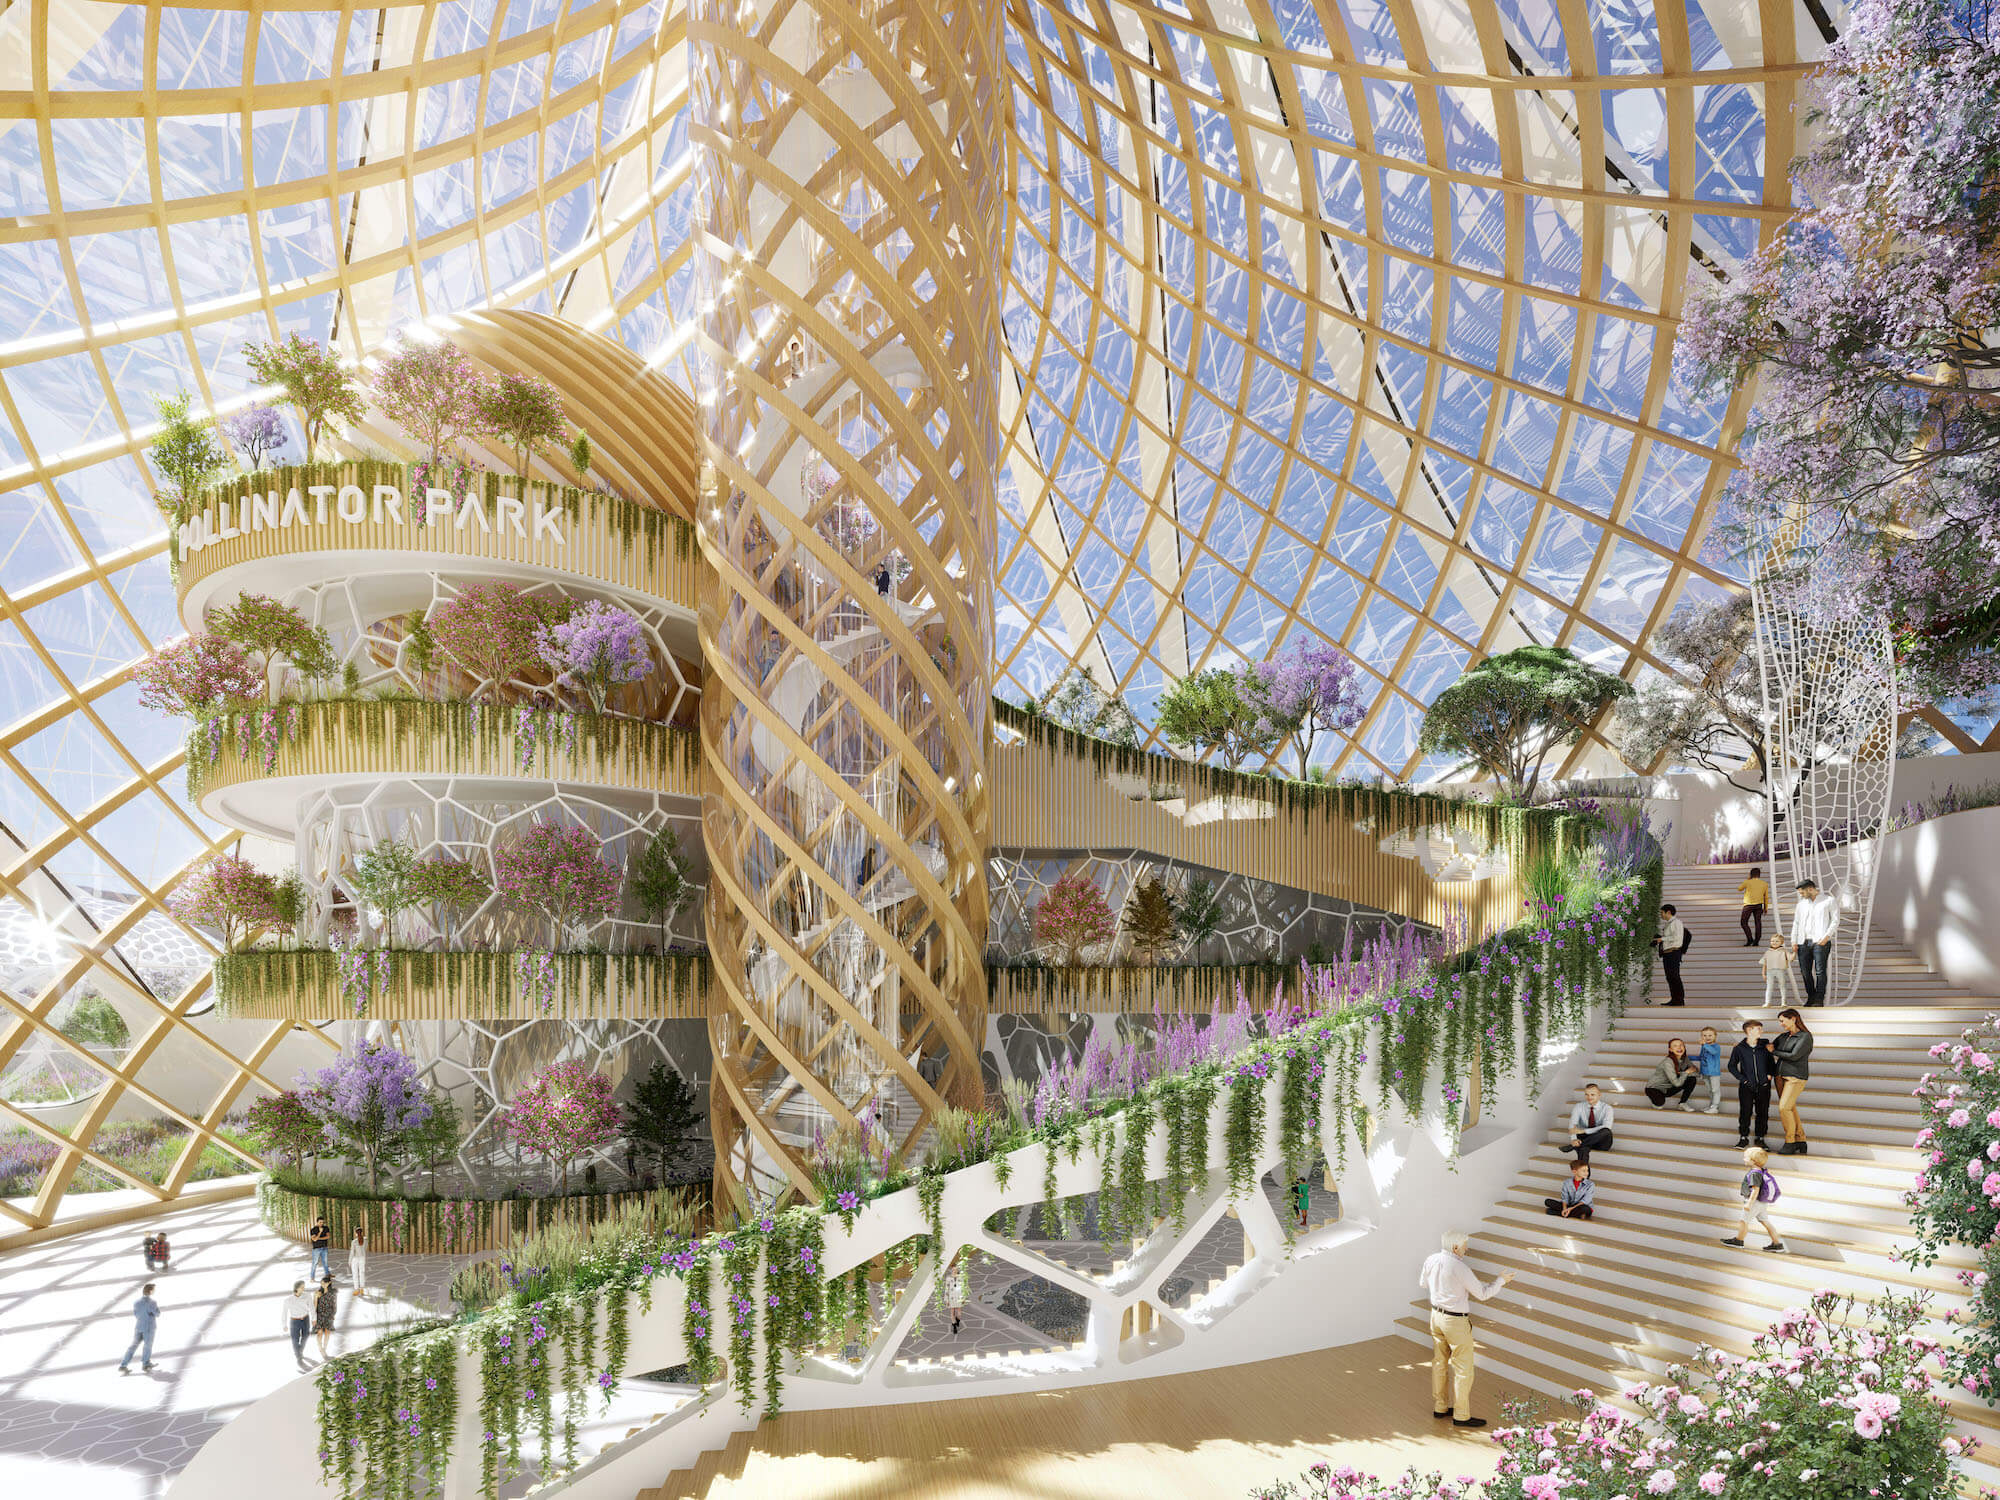 Amazing application of biomimicry in Pollinator Park, image by Vincent Callebaut